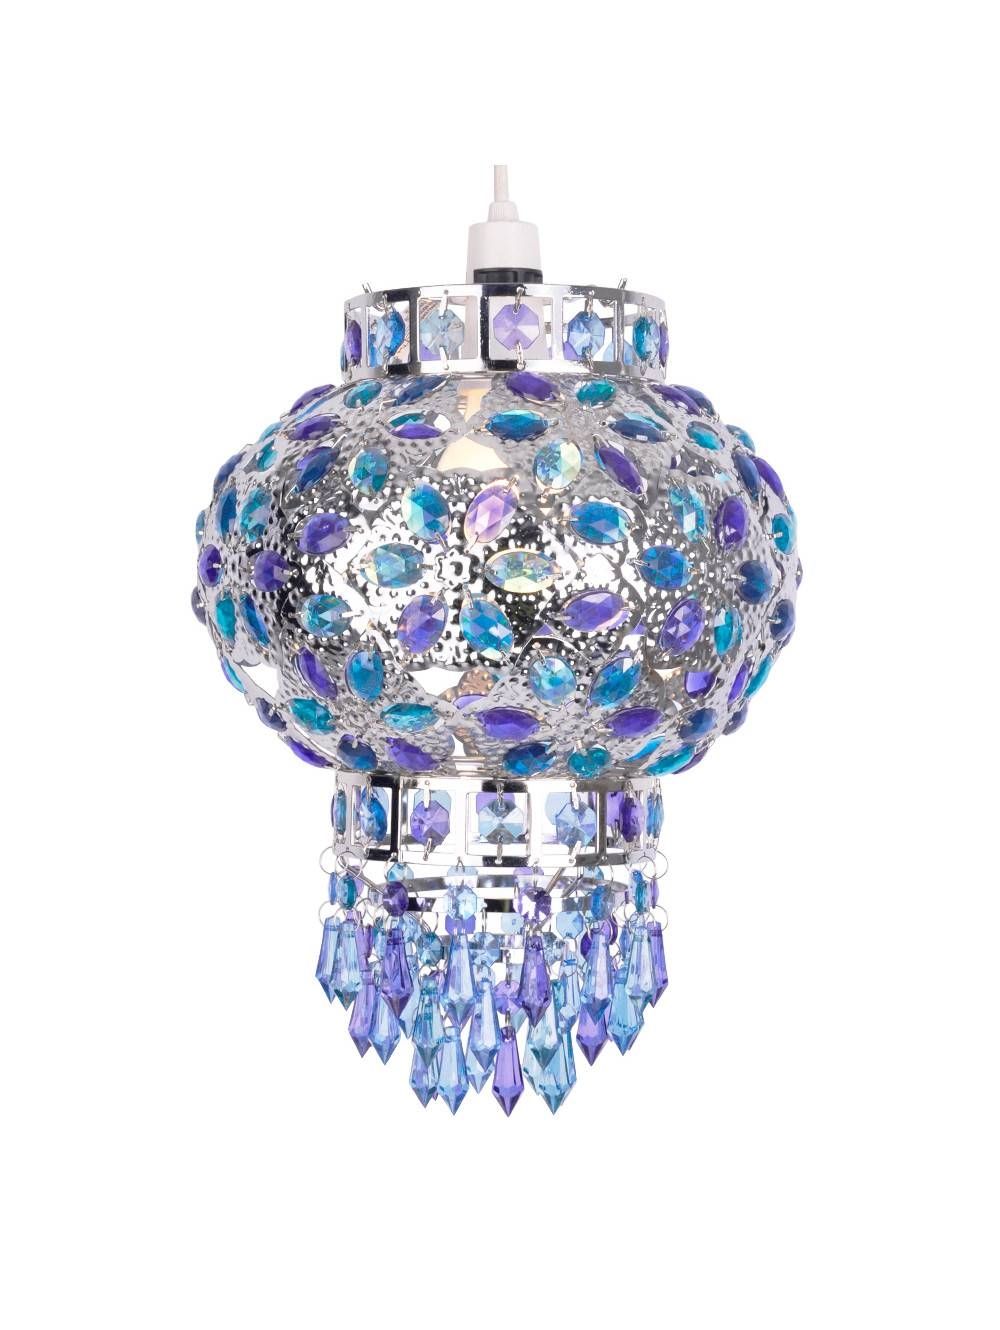 Moroccan Style Multi Coloured Ceiling Pendant Shade With Jewel With Regard To Moroccan Style Lights Shades (View 15 of 15)